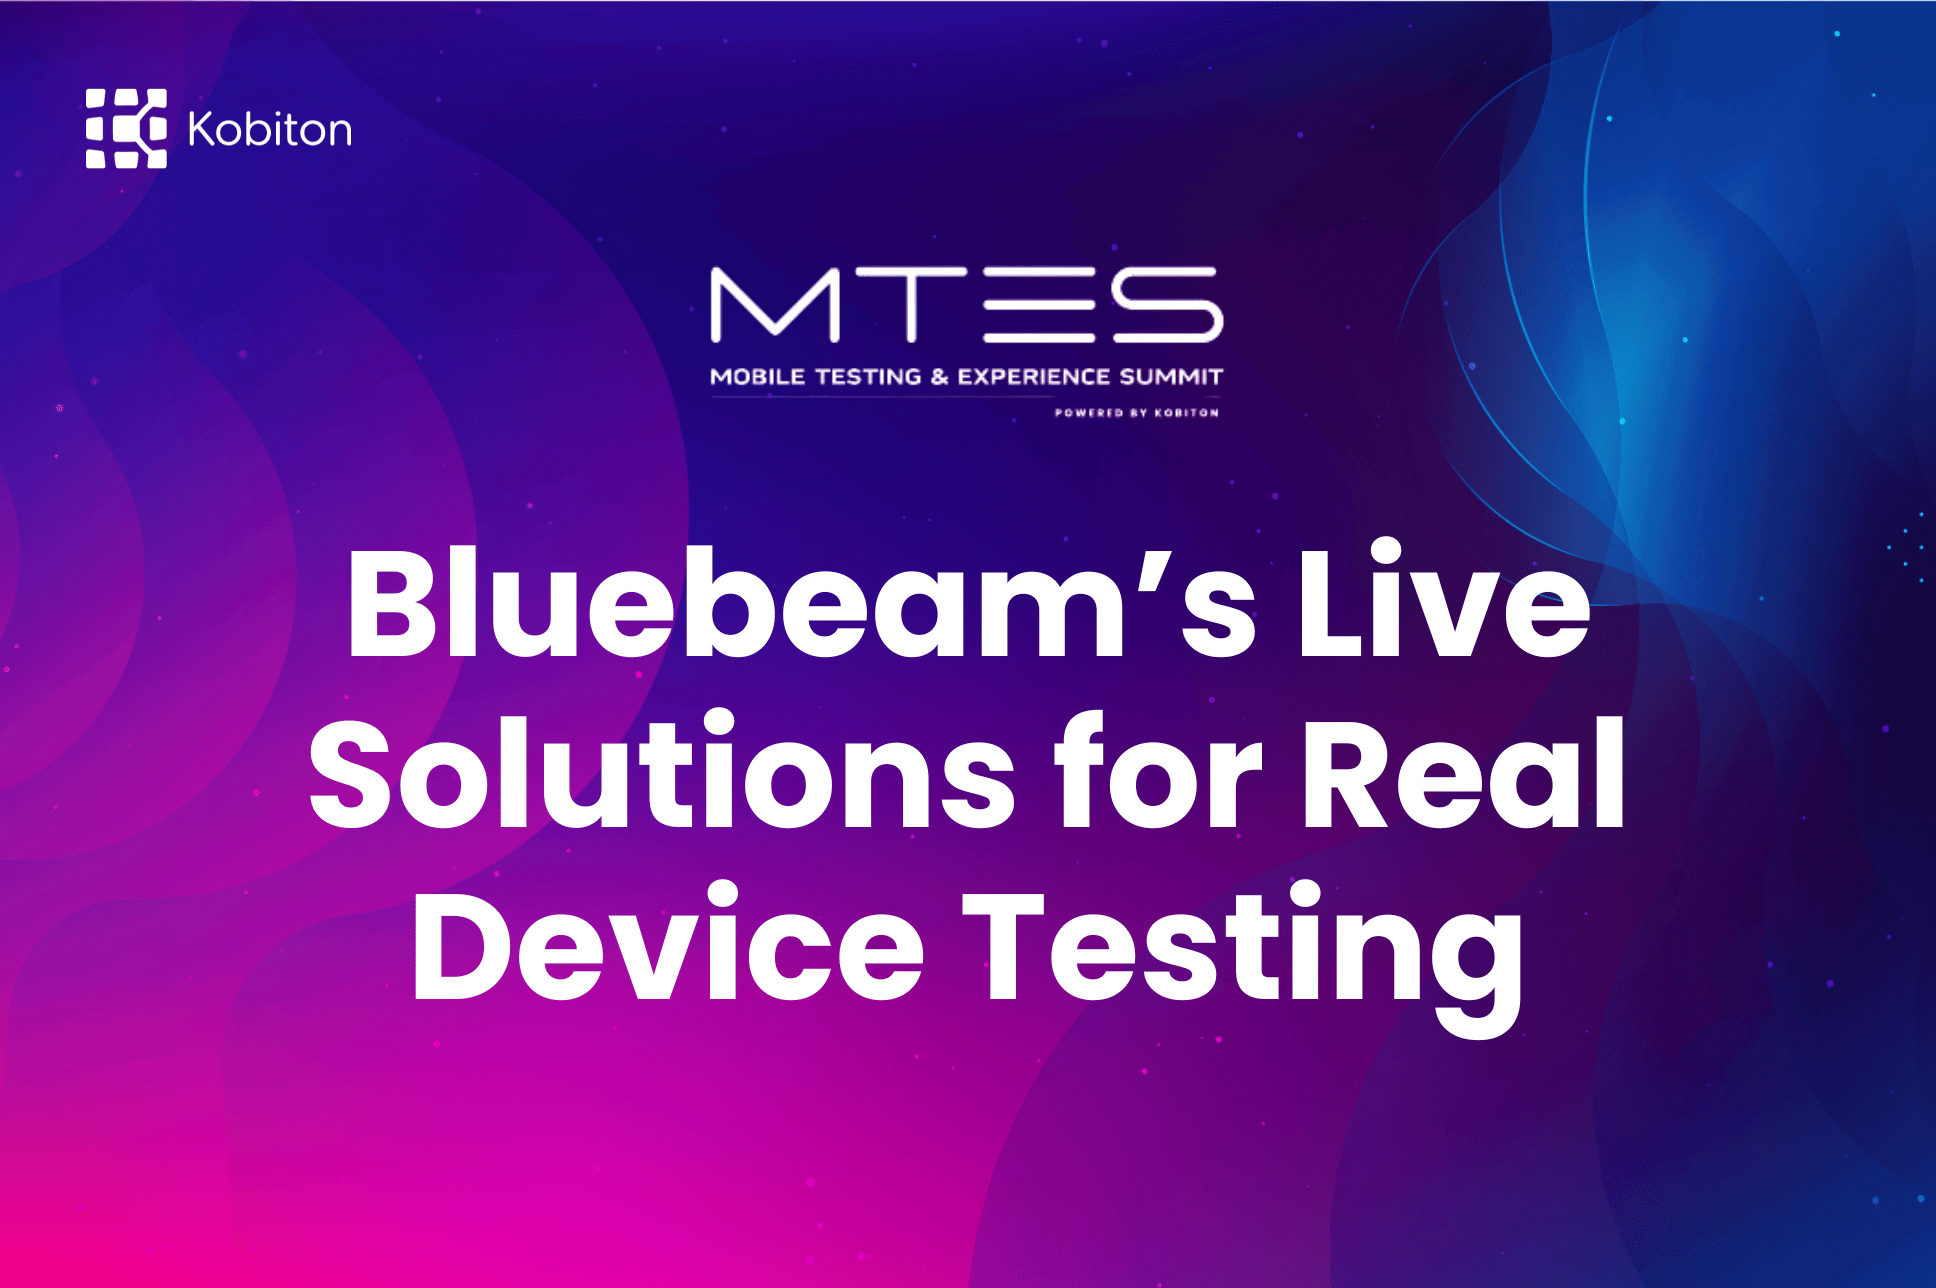 Bluebeam’s Live Solutions for Real Device Testing